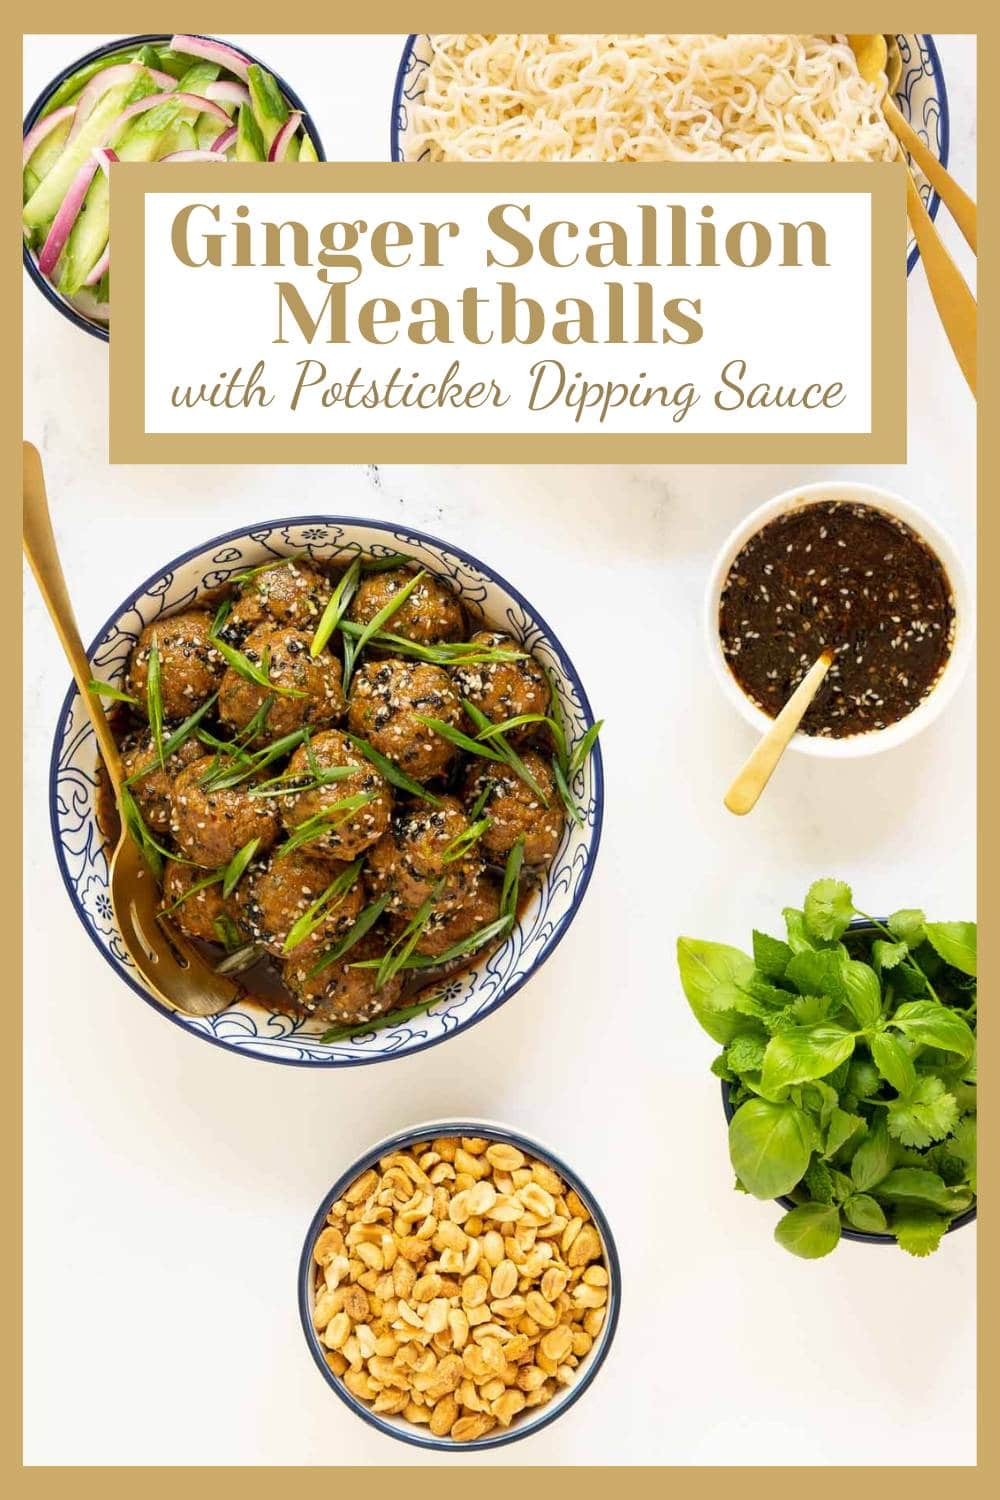 Ginger Scallion Meatballs with Potsticker Dipping Sauce